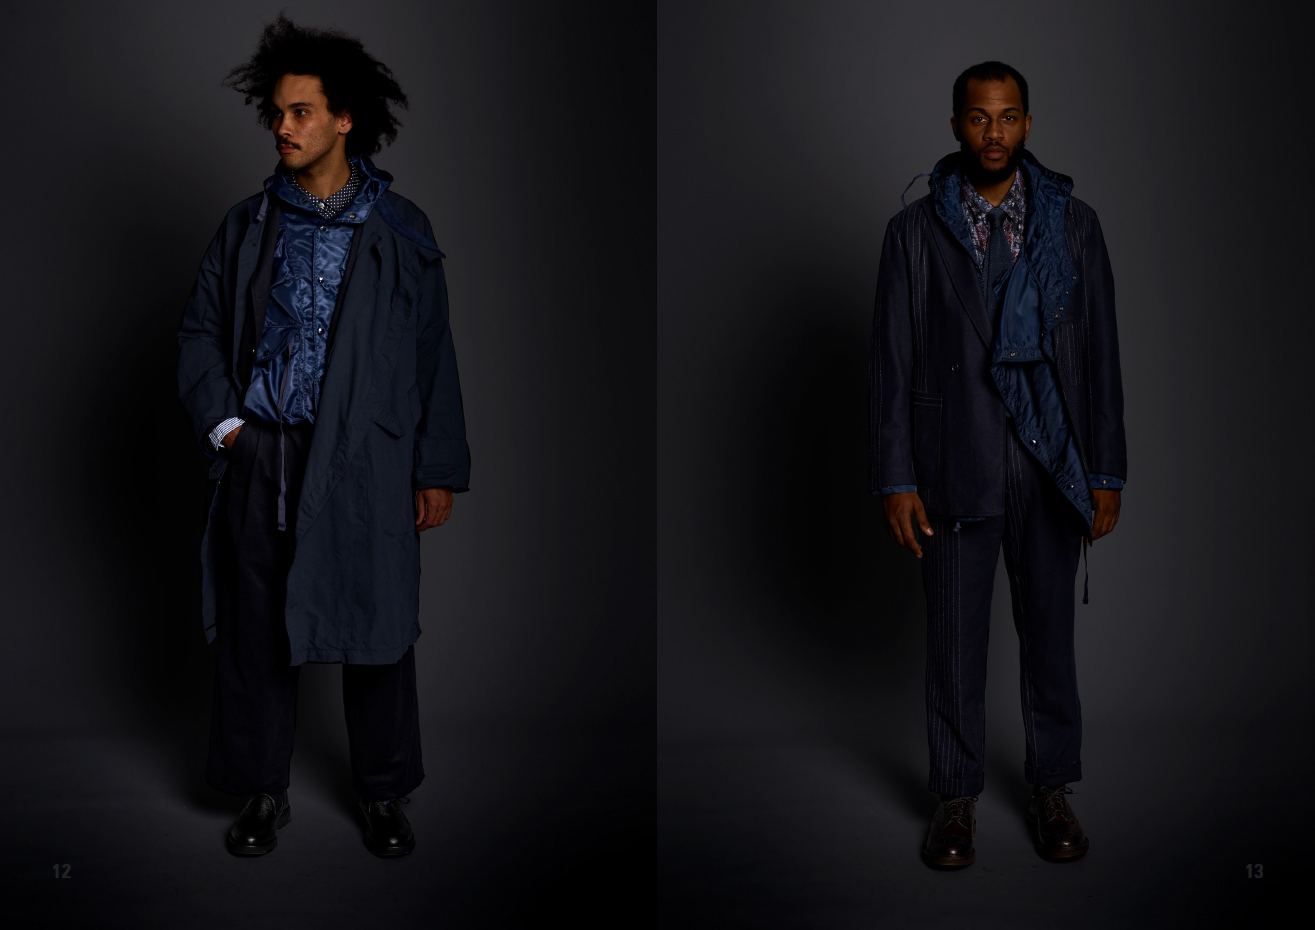 roman-yee-nepenthes-engineered-garments-fashion-beauty-editorial-commercial-photography-nyc-lookbook-08.JPEG